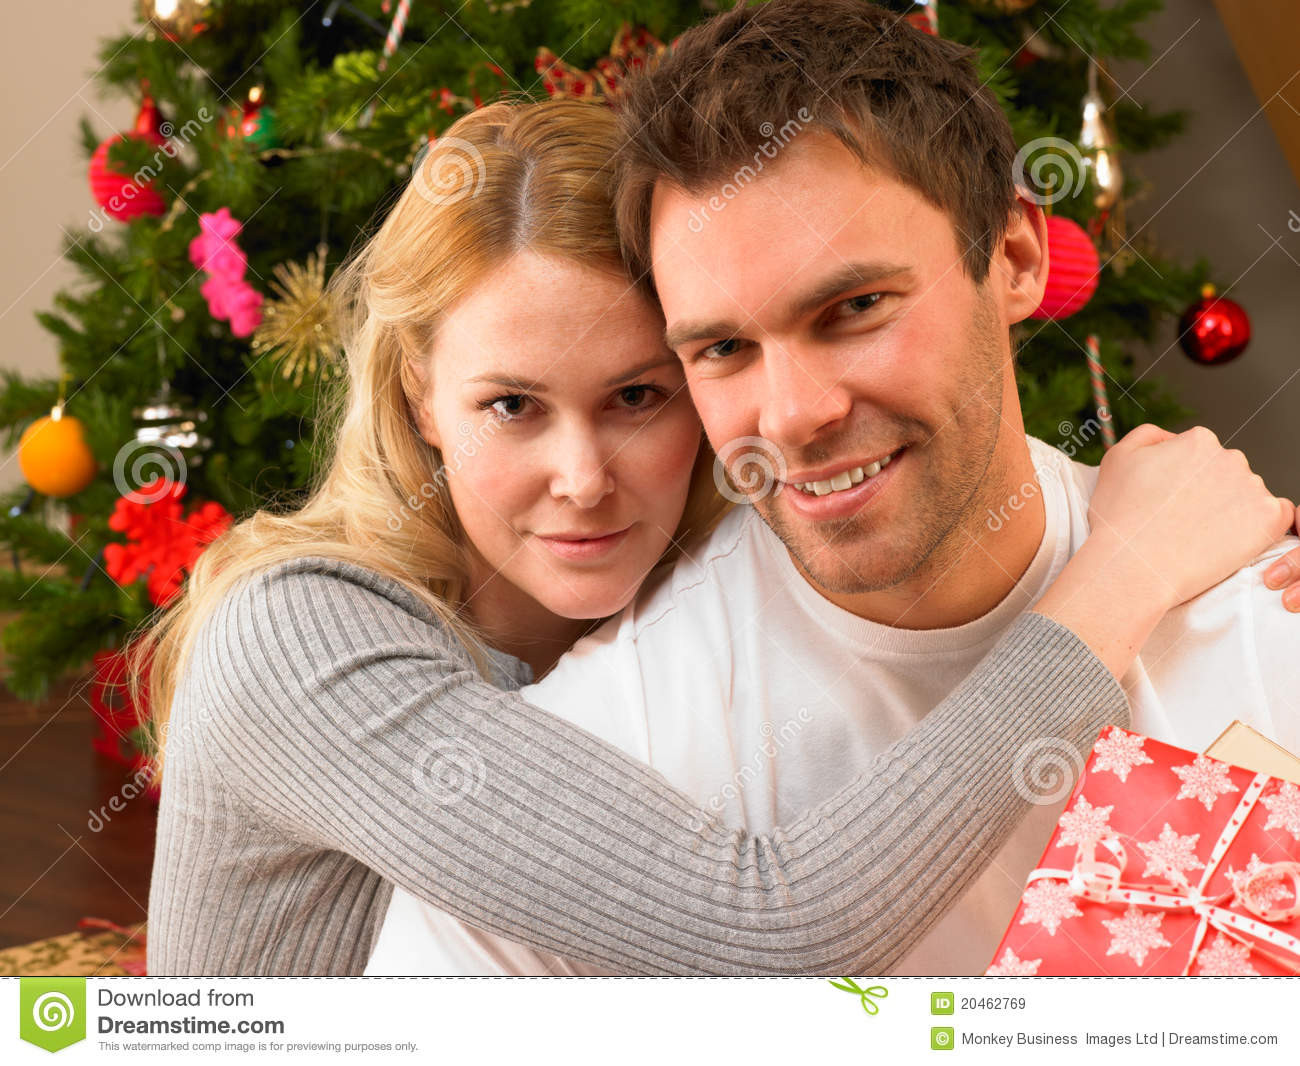 Christmas Gift Ideas For Young Couples
 Young Couple With Gifts In Front Christmas Tree Stock